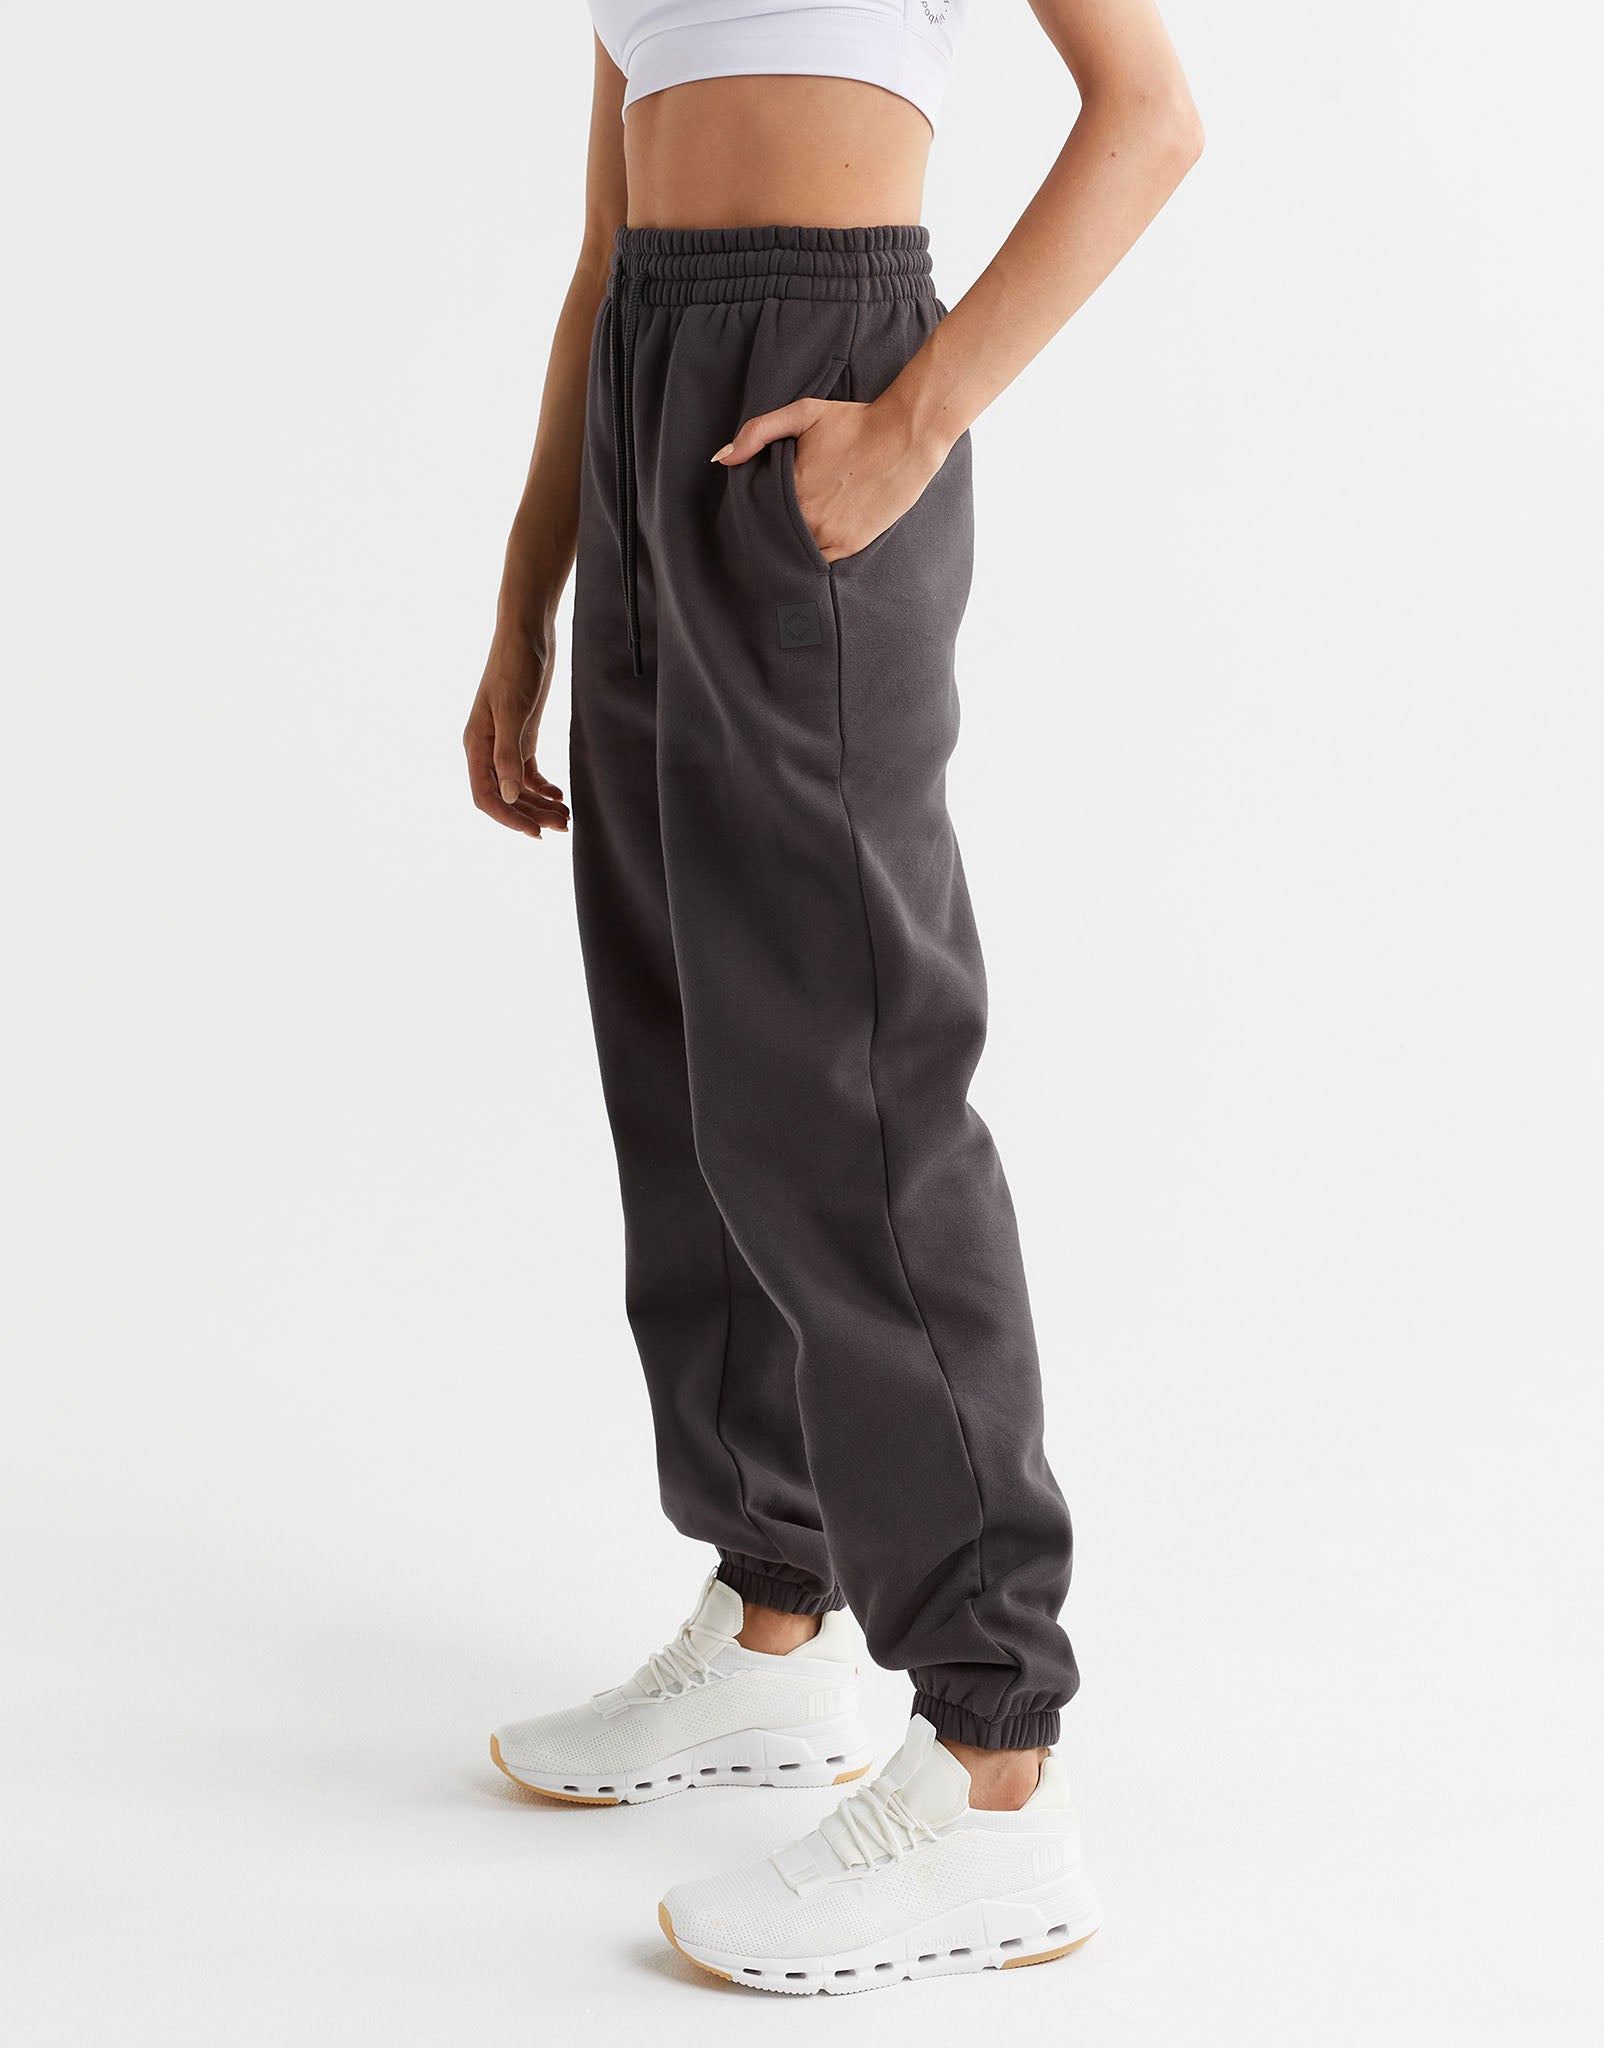 Lilybod-Lucy-Oversized-Fleece-Track-Pant-Coal-Gray-LL89-CLG-3-New.jpeg